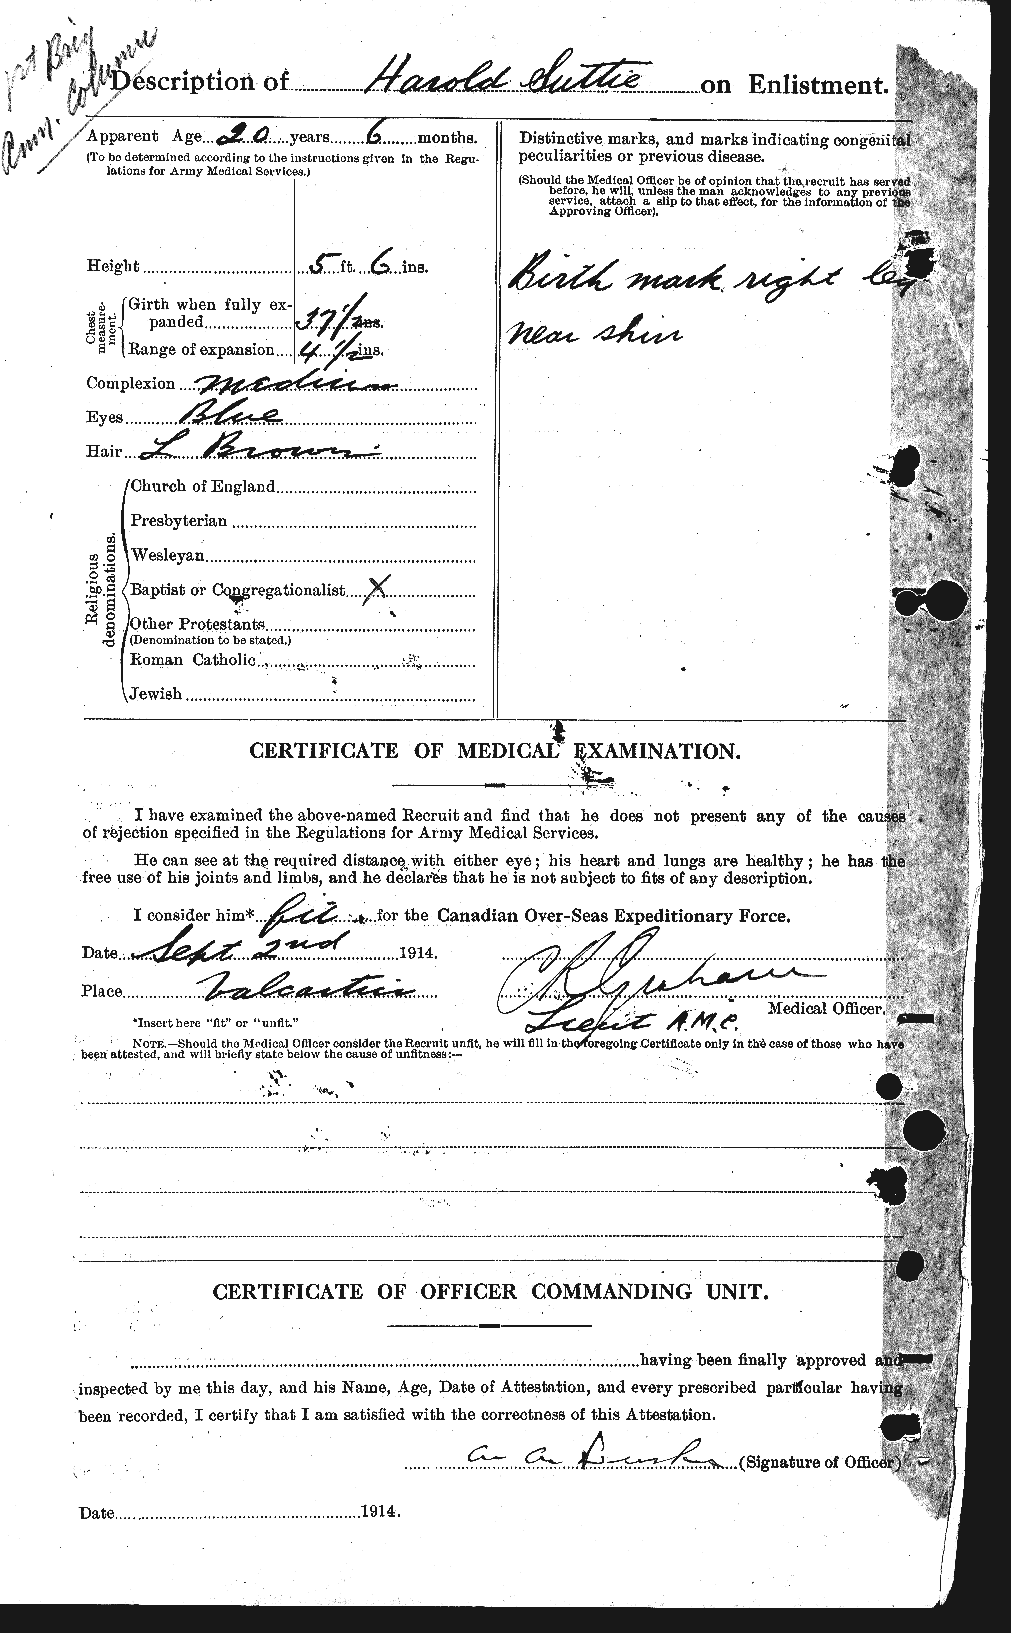 Personnel Records of the First World War - CEF 126305b